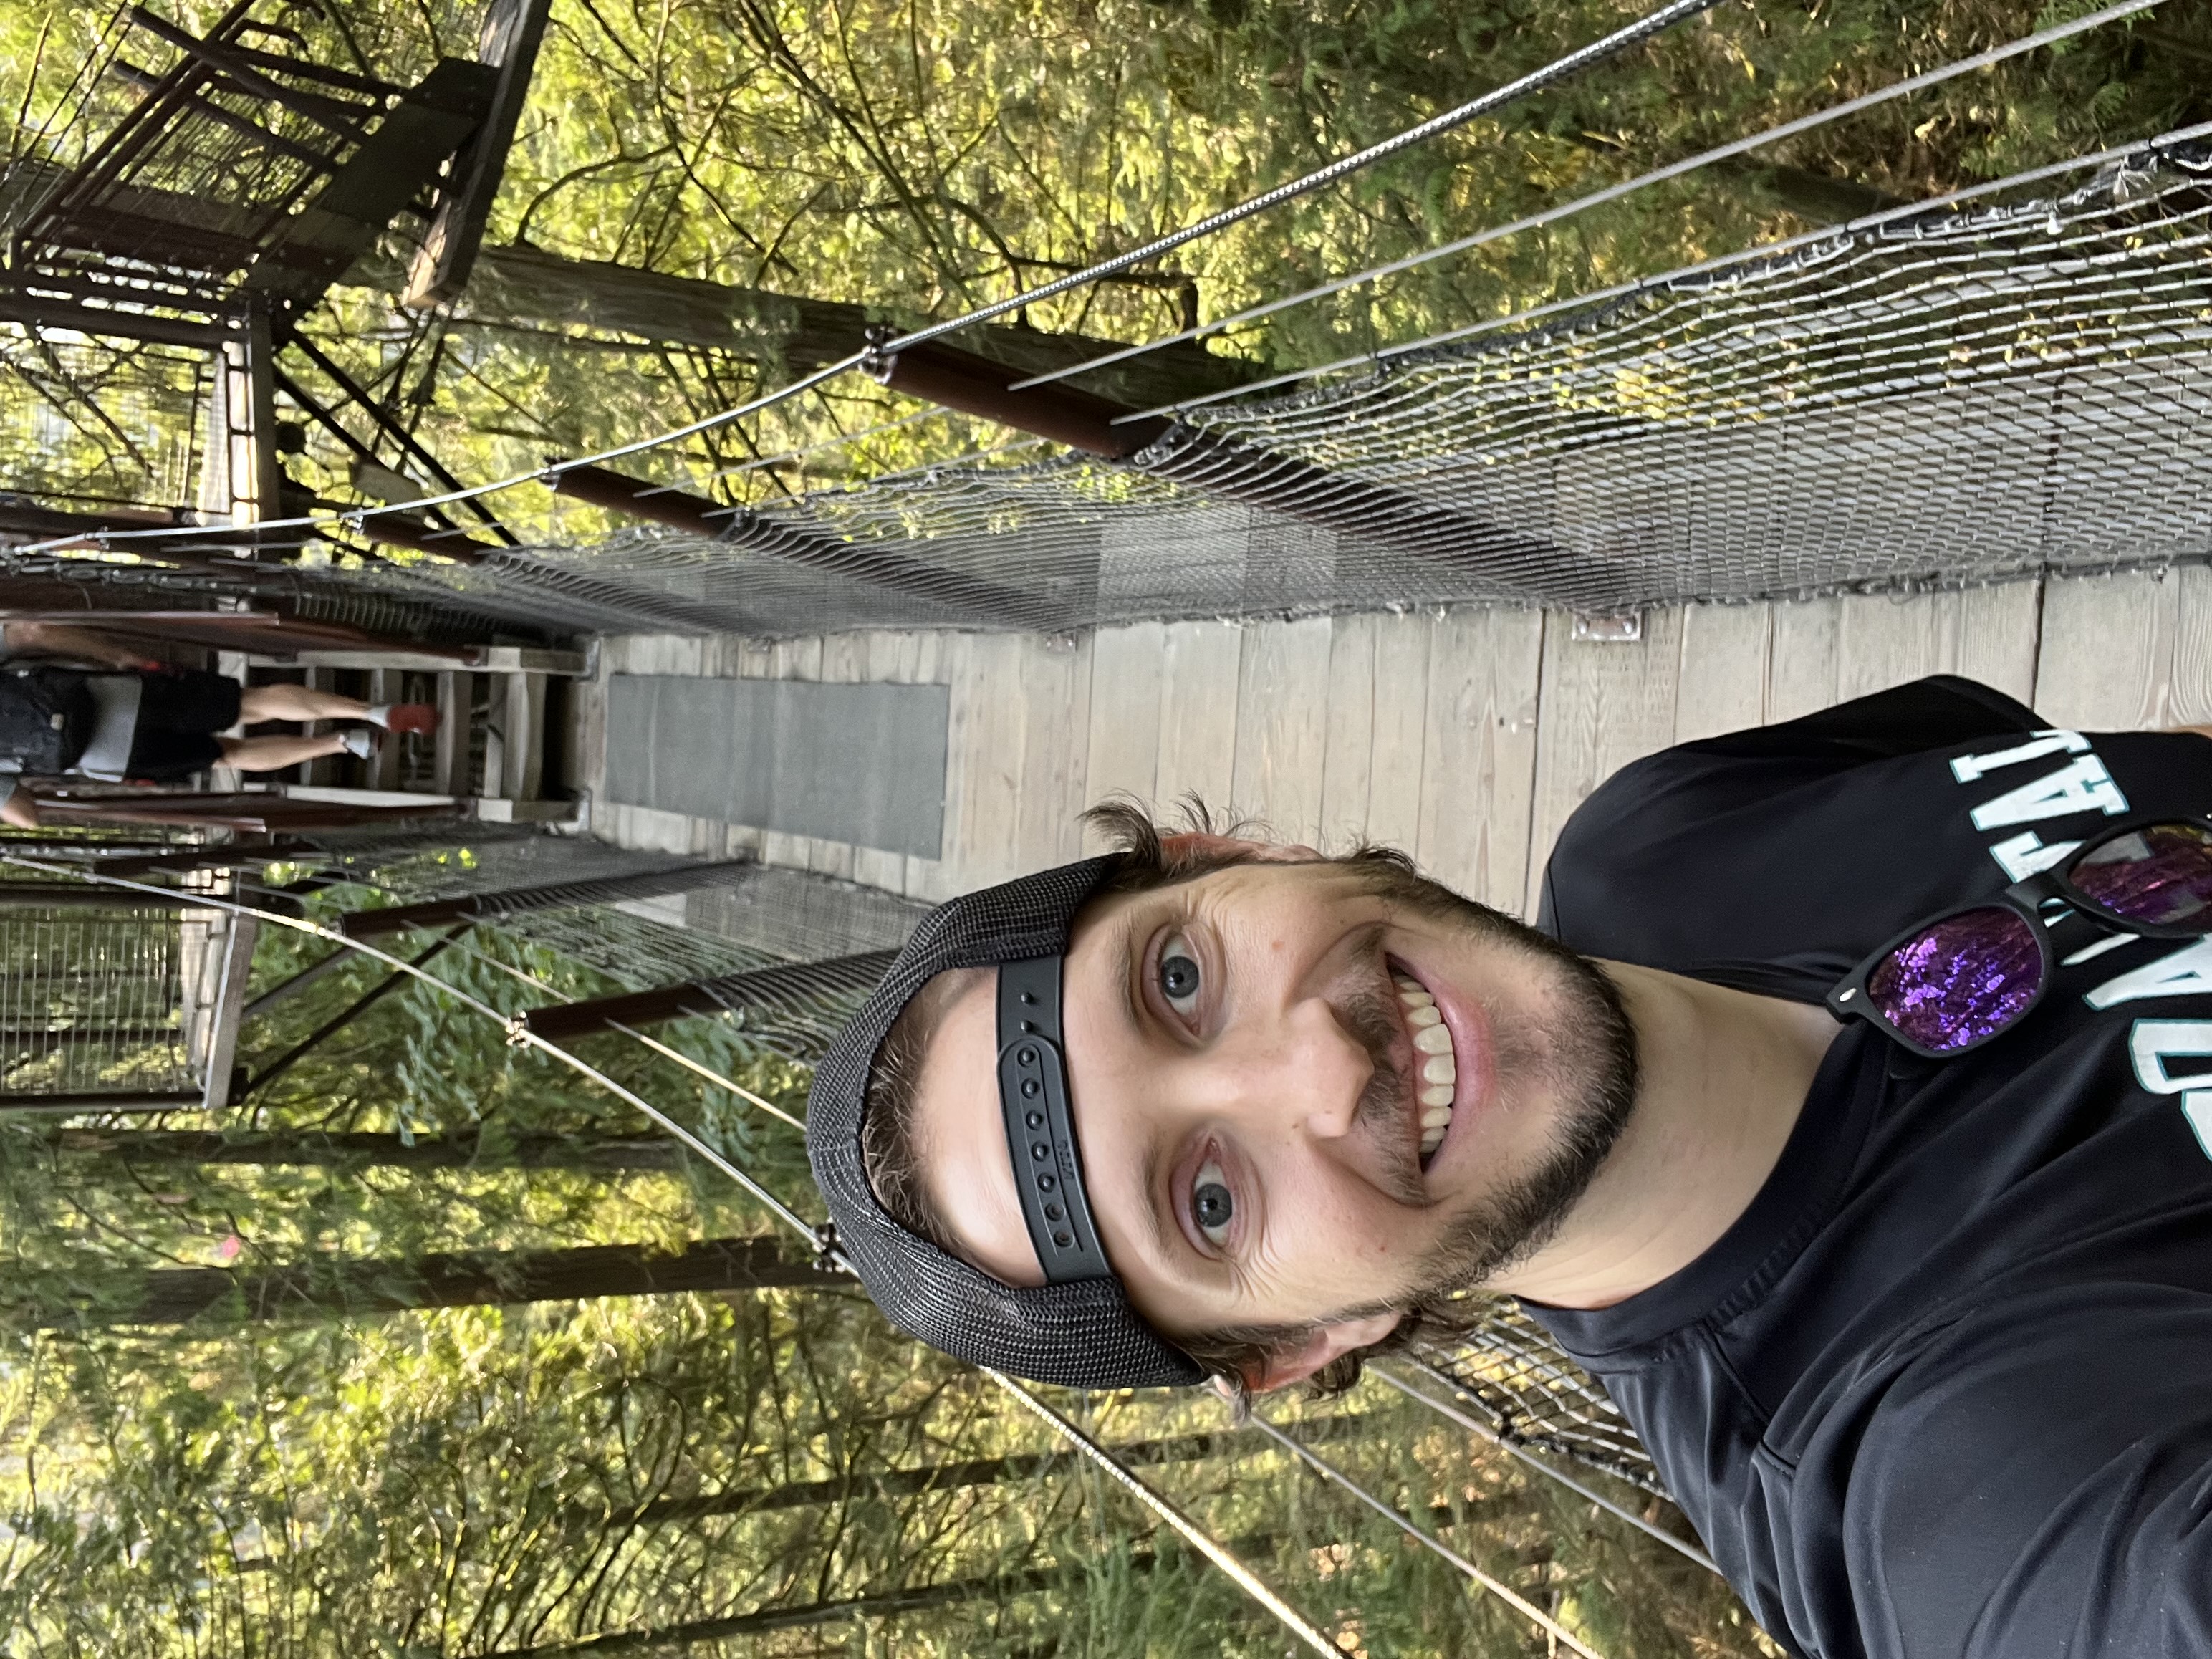 A man takes a selfie on a bridge in a forest canopy